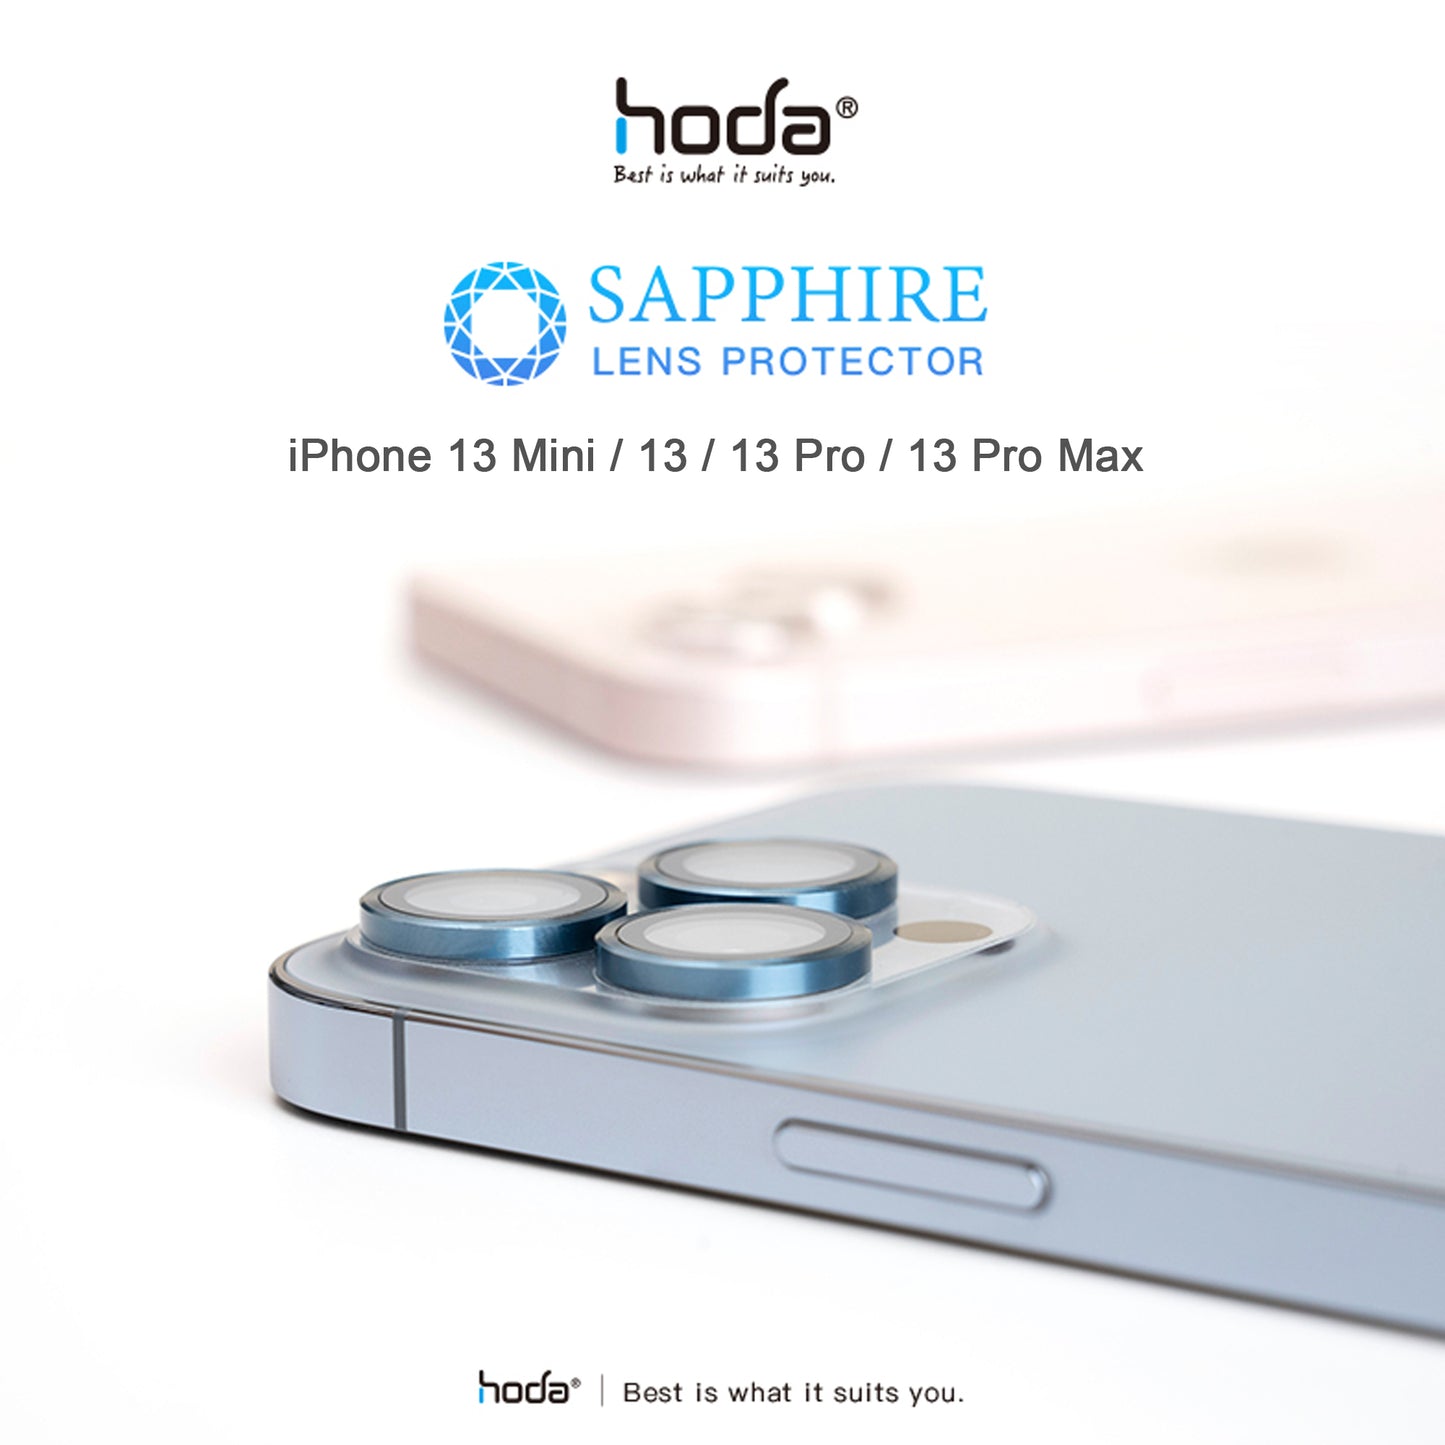 Hoda Sapphire Lens Protector for iPhone 13 Mini - 13 - Stralight Silver (2pcs) (Barcode: 4711103542781 )